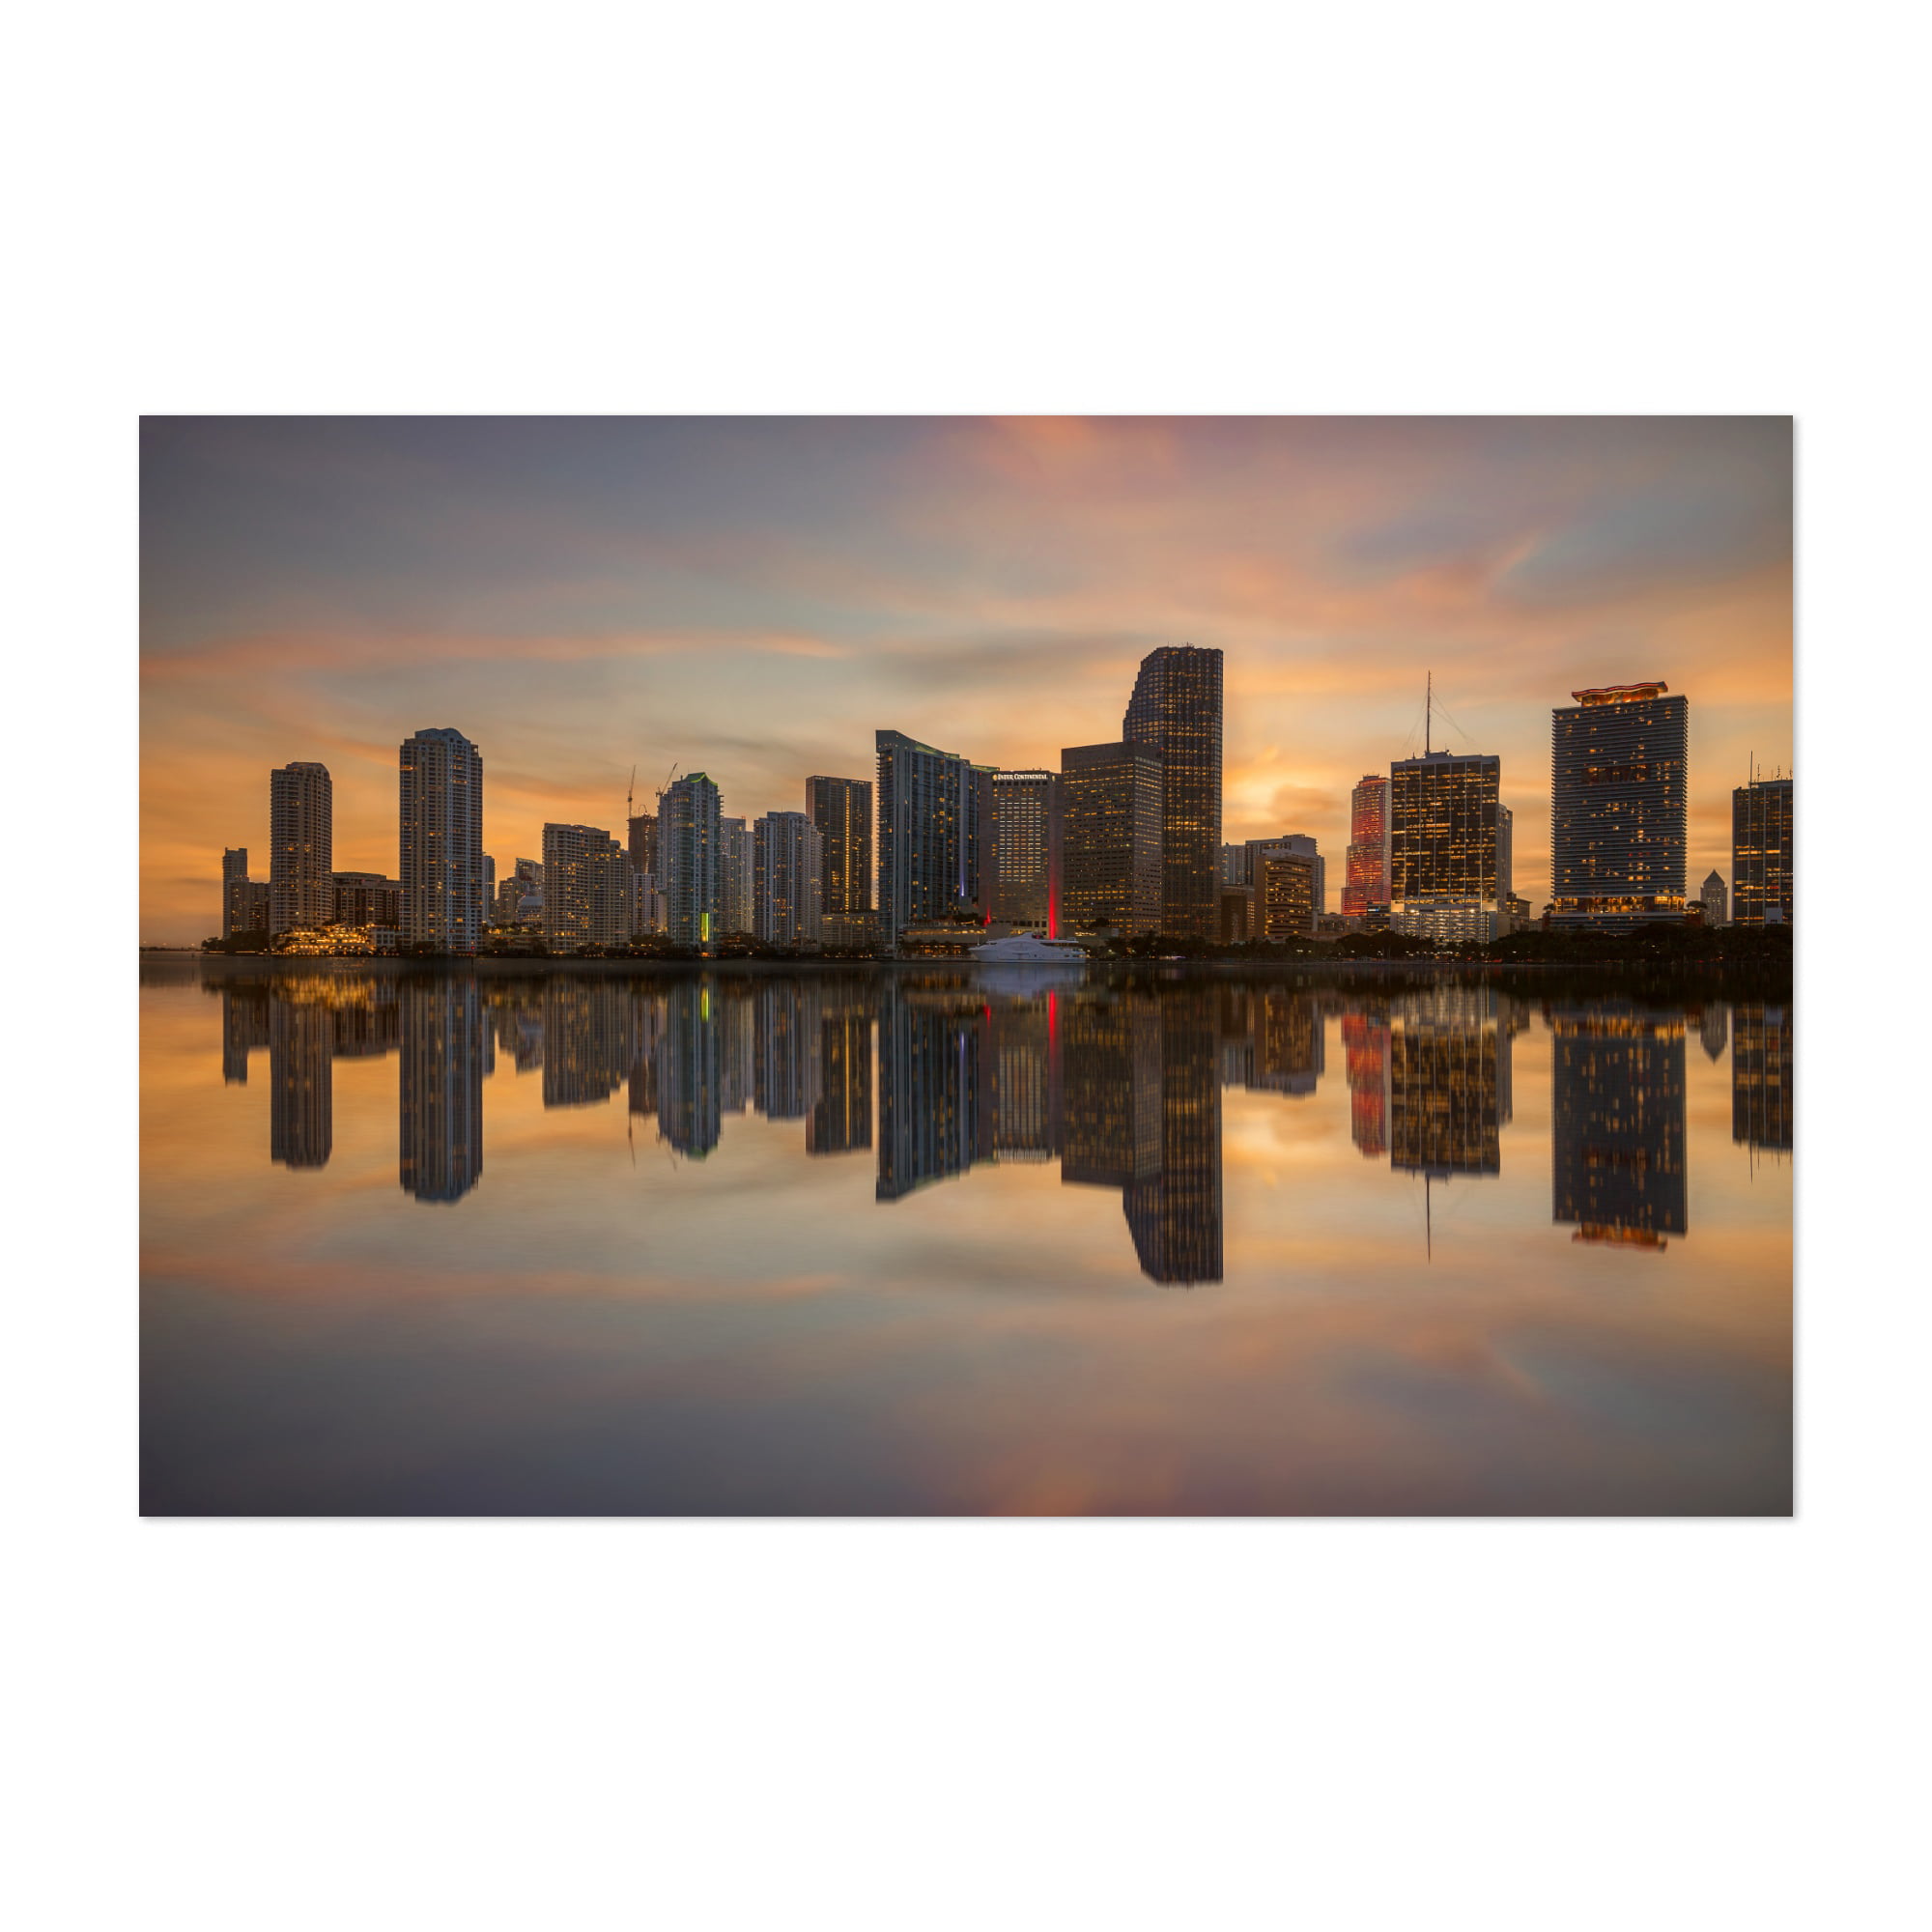 Miami Florida Downtown City Skyline Sunset Photo inch Poster 24x36 inch 